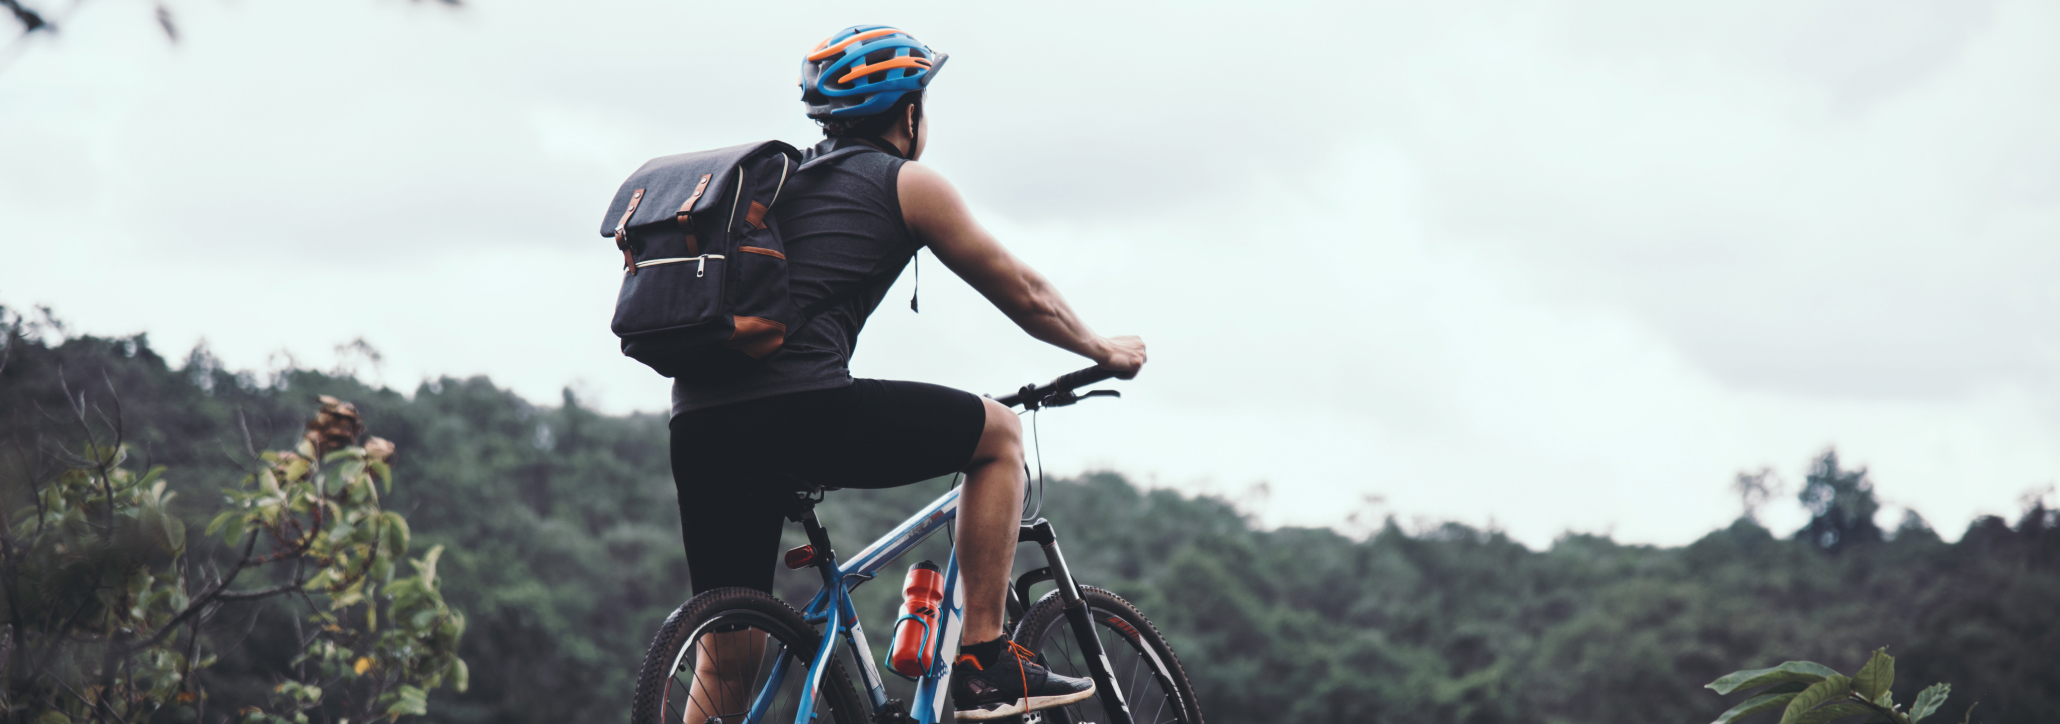 Biking to Lose Weight: Cycling Tips for Weight Loss